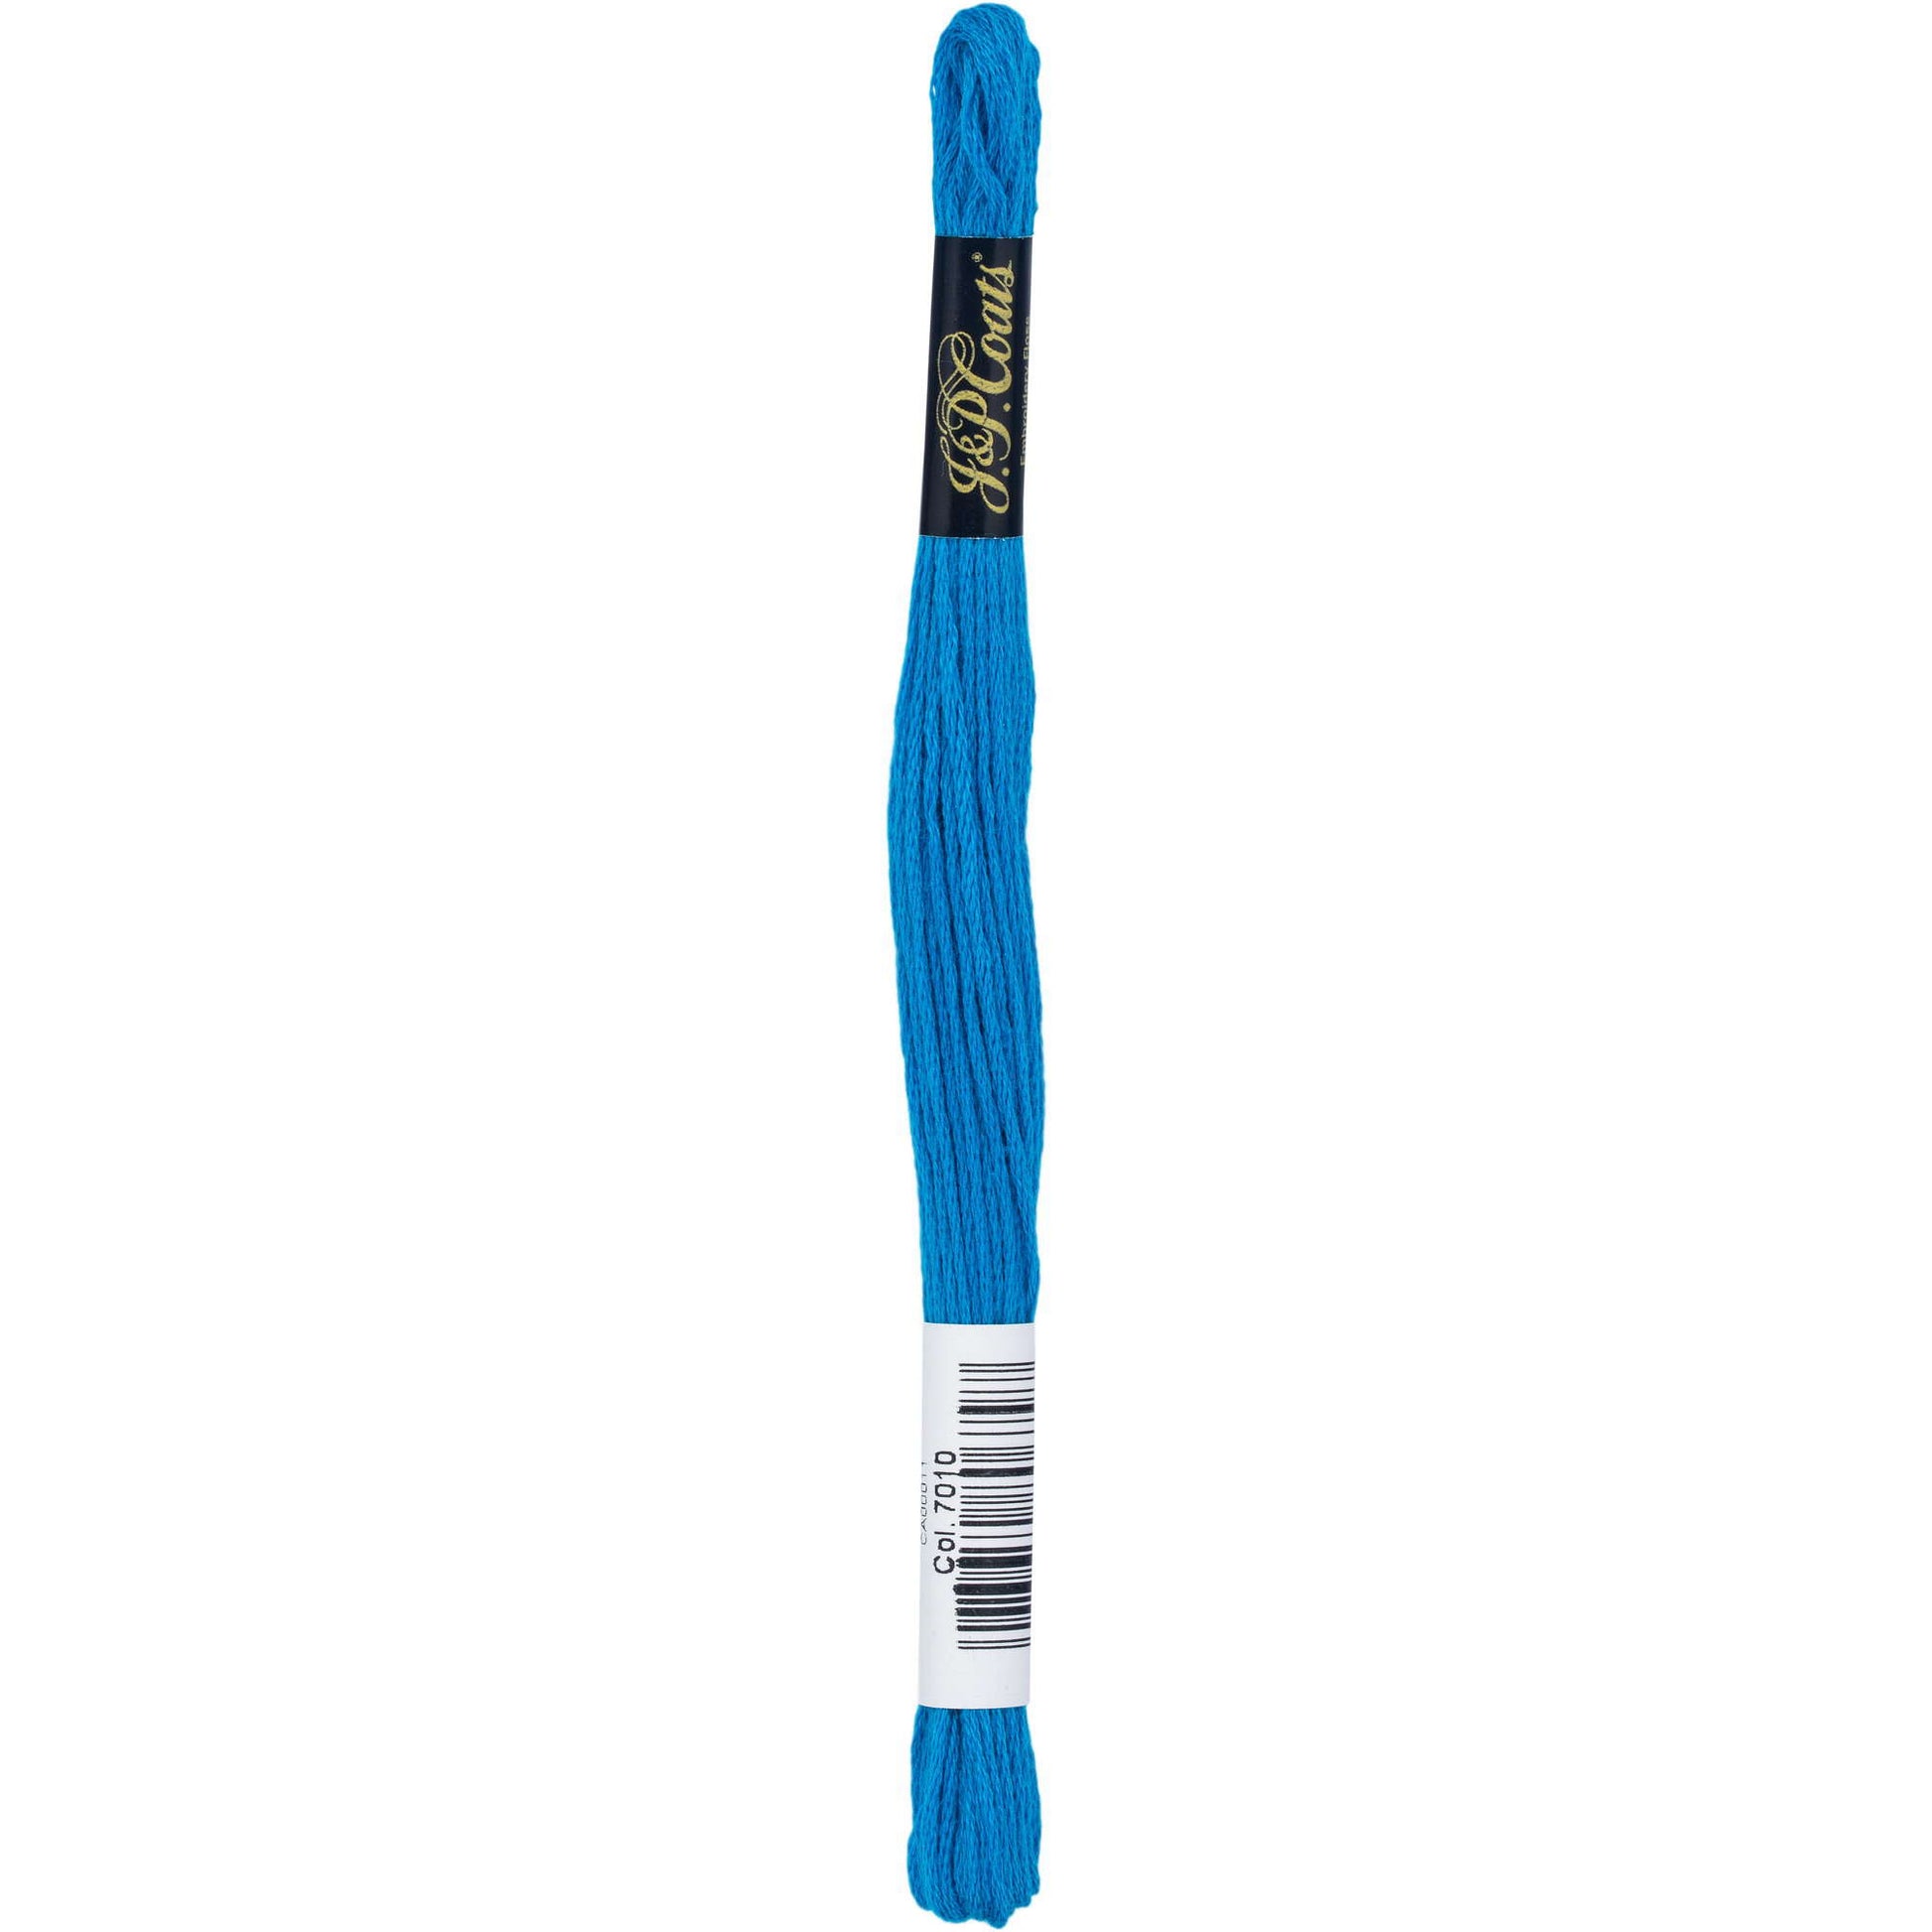 Coats & Clark Cotton Embroidery Floss Imperial Blue